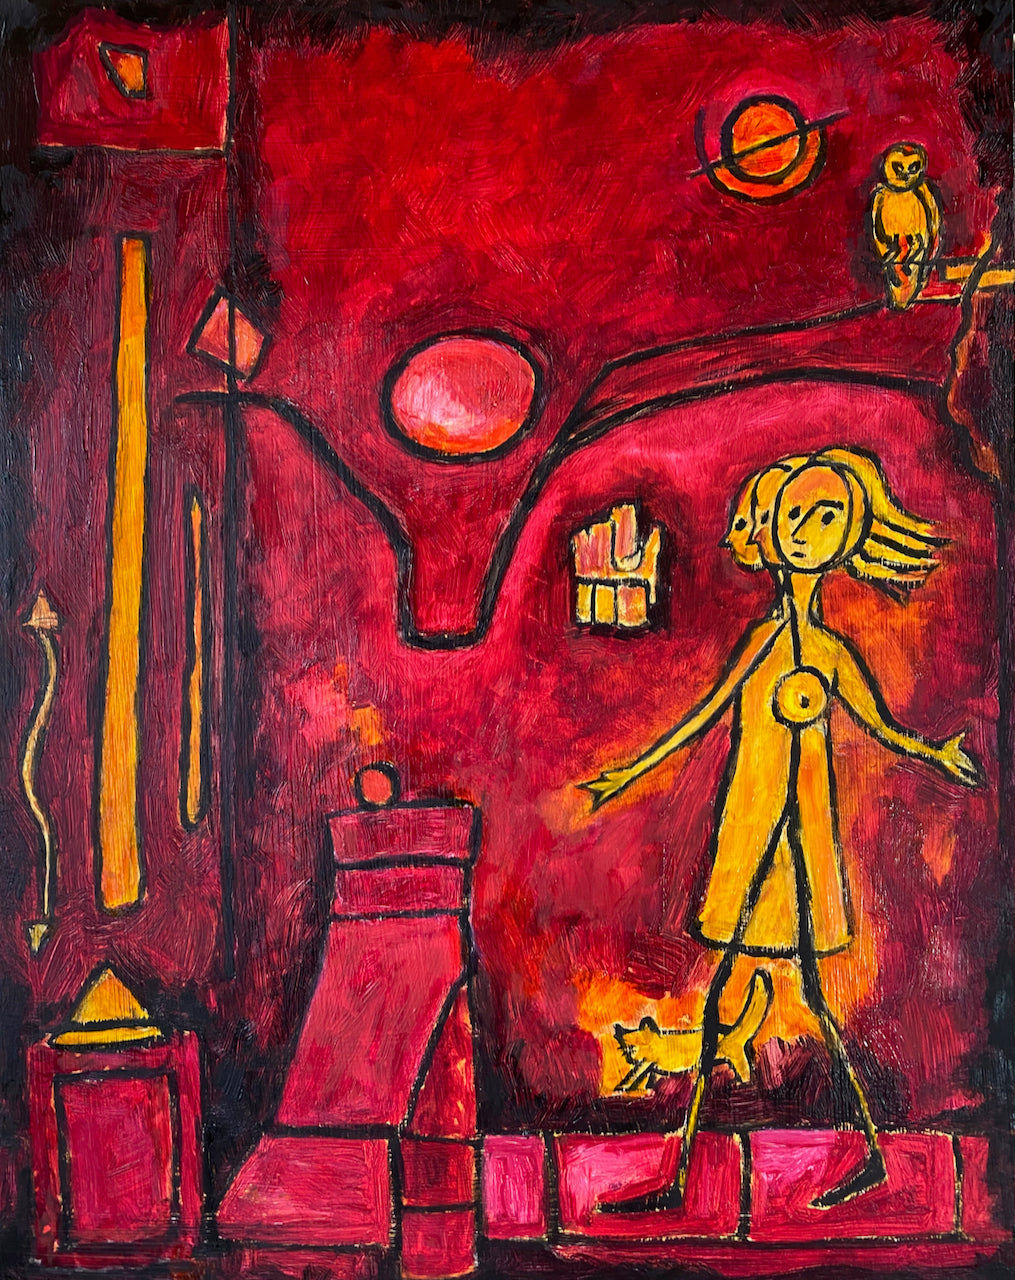 "Night of the Spirit" by Marilyn Wells, Red oil painting with figures for "Dream Signs, Decoding Symbols and Messages"